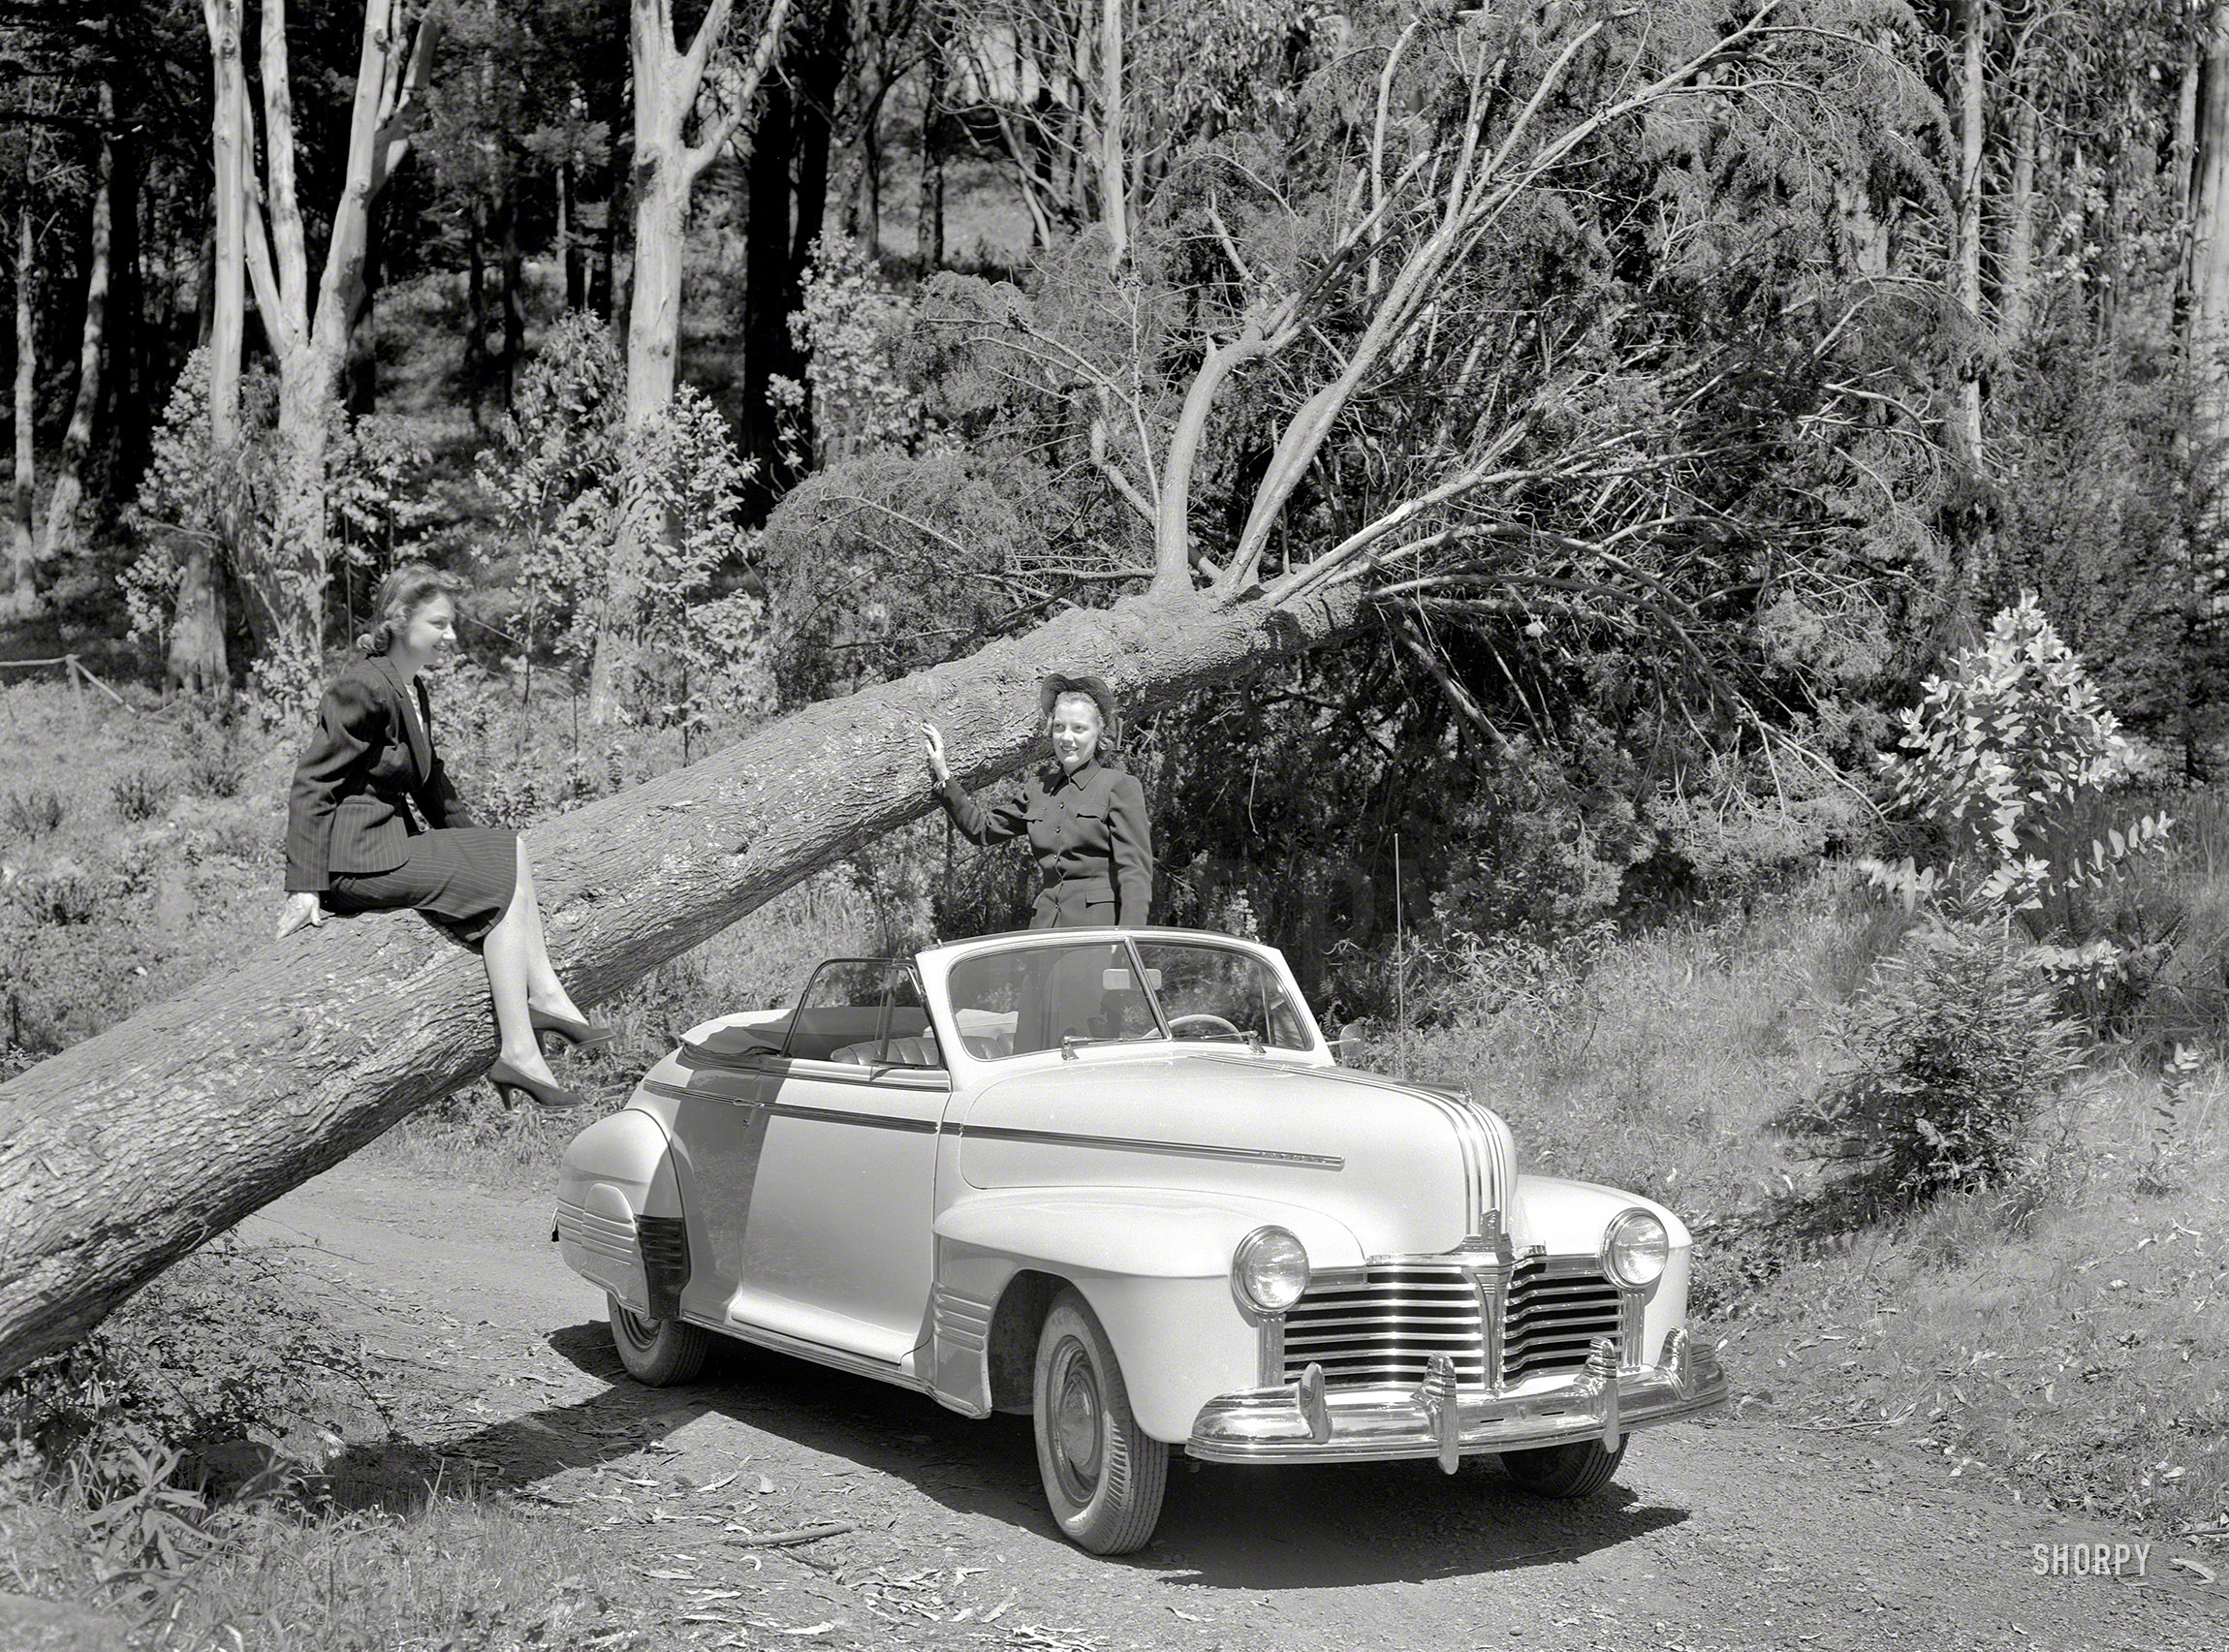 March 22, 1941. "Pontiac in Mount Davidson Park, San Francisco." So if a  tree falls on a convertible in the woods ... 8x10 acetate negative. View full size.